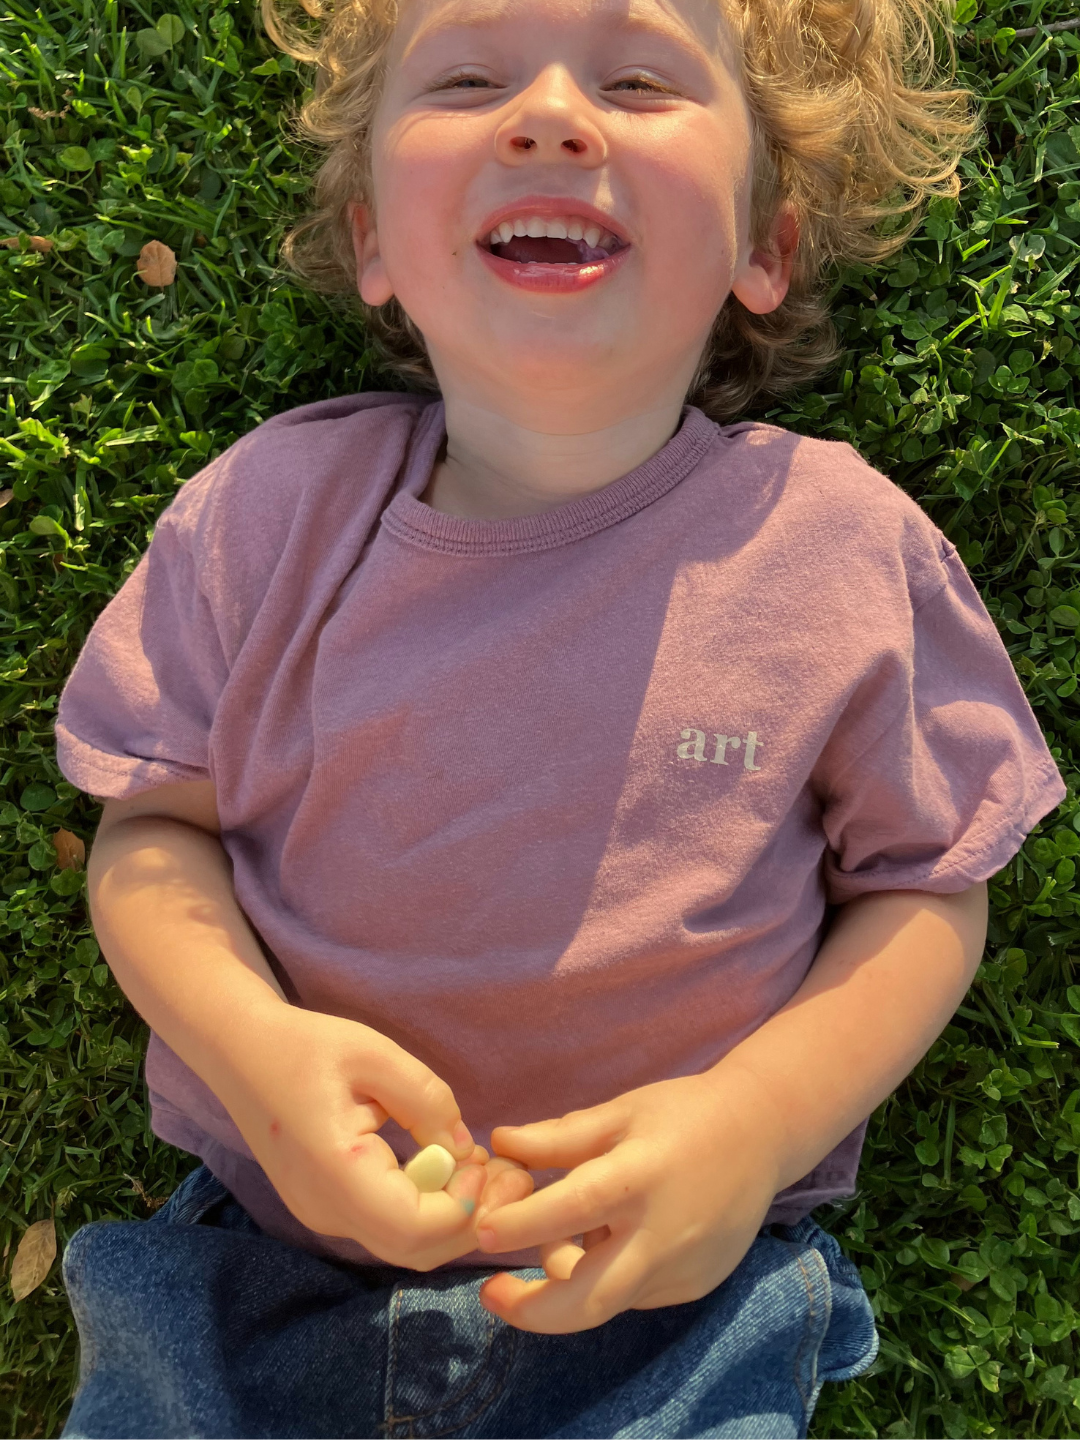 A child is wearing the Studio Tee in Mauve with dark denim jeans, laying on the grass laughing